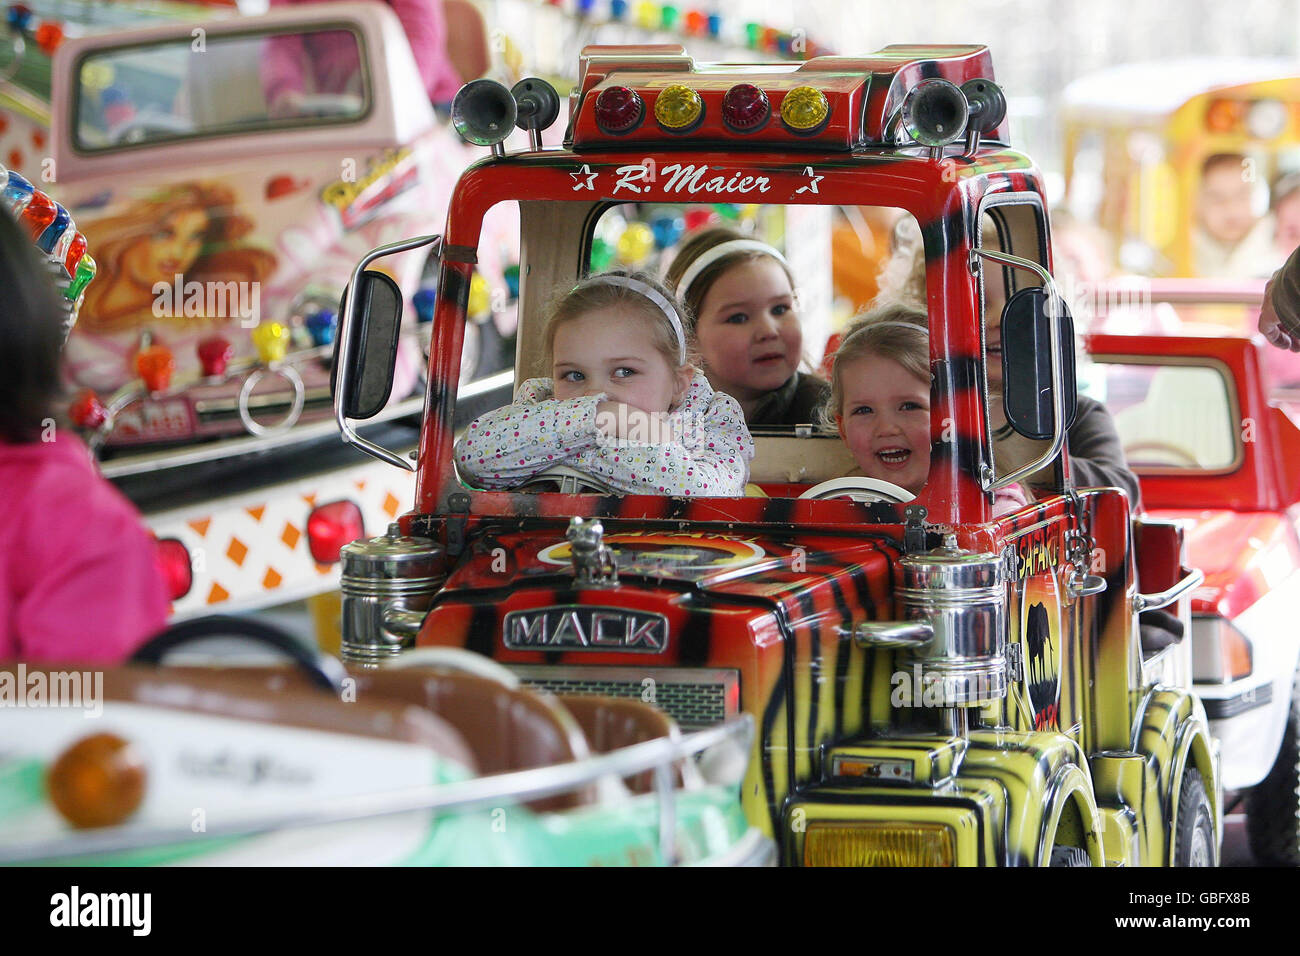 Children on a funfair ride in Dublin's Merrion Square. The Funfair is part of the ongoing St. Patrick's festival which runs until March 17. Stock Photo